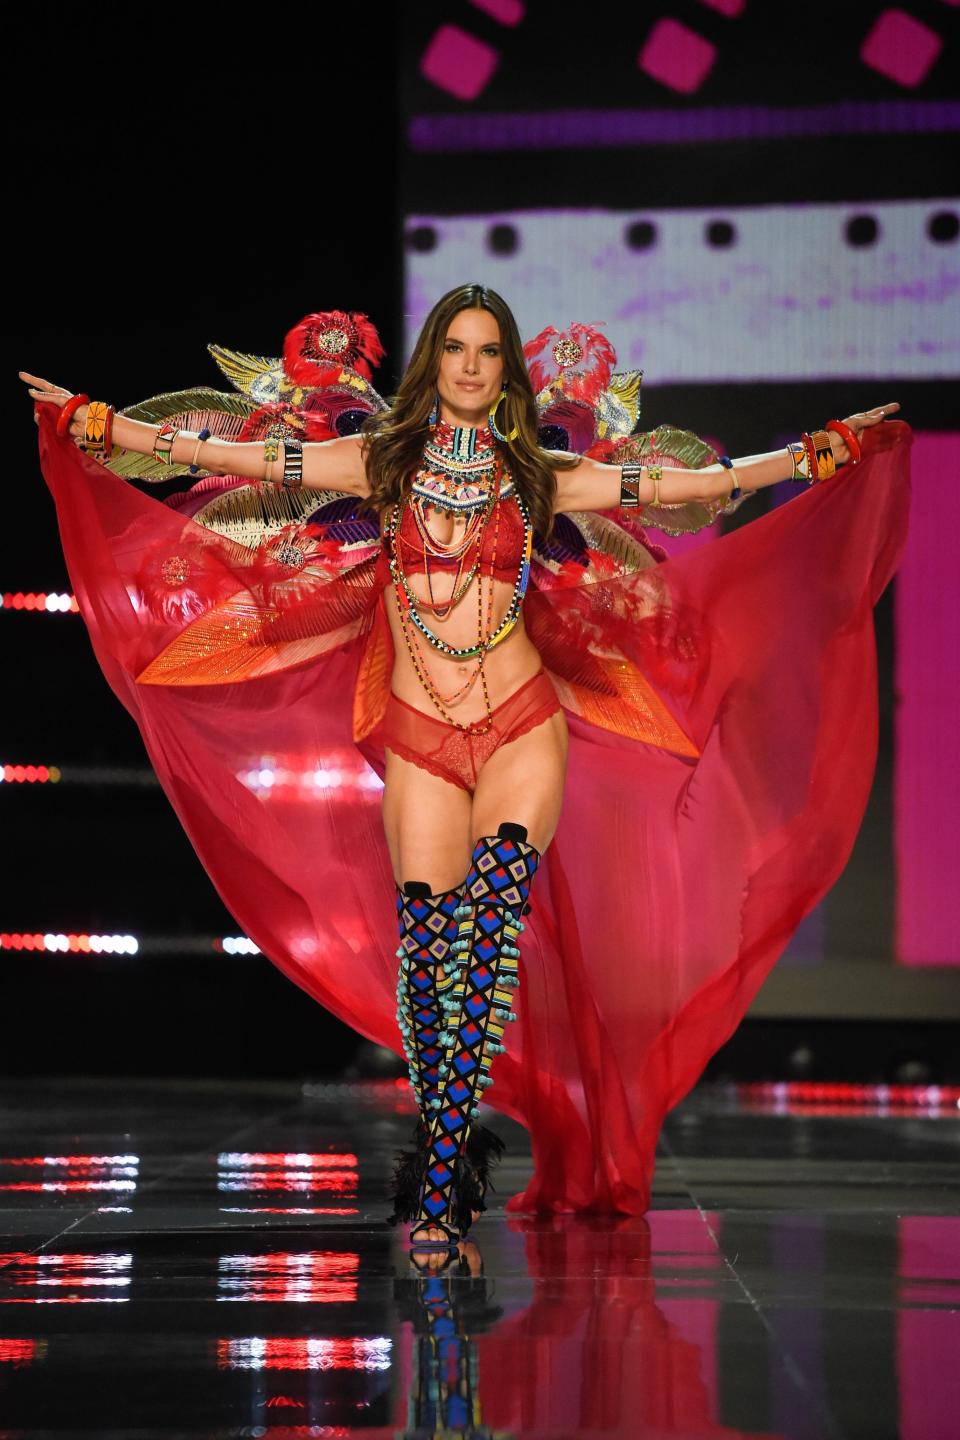 Alessandra Ambrosio (Photo: FRED DUFOUR via Getty Images)